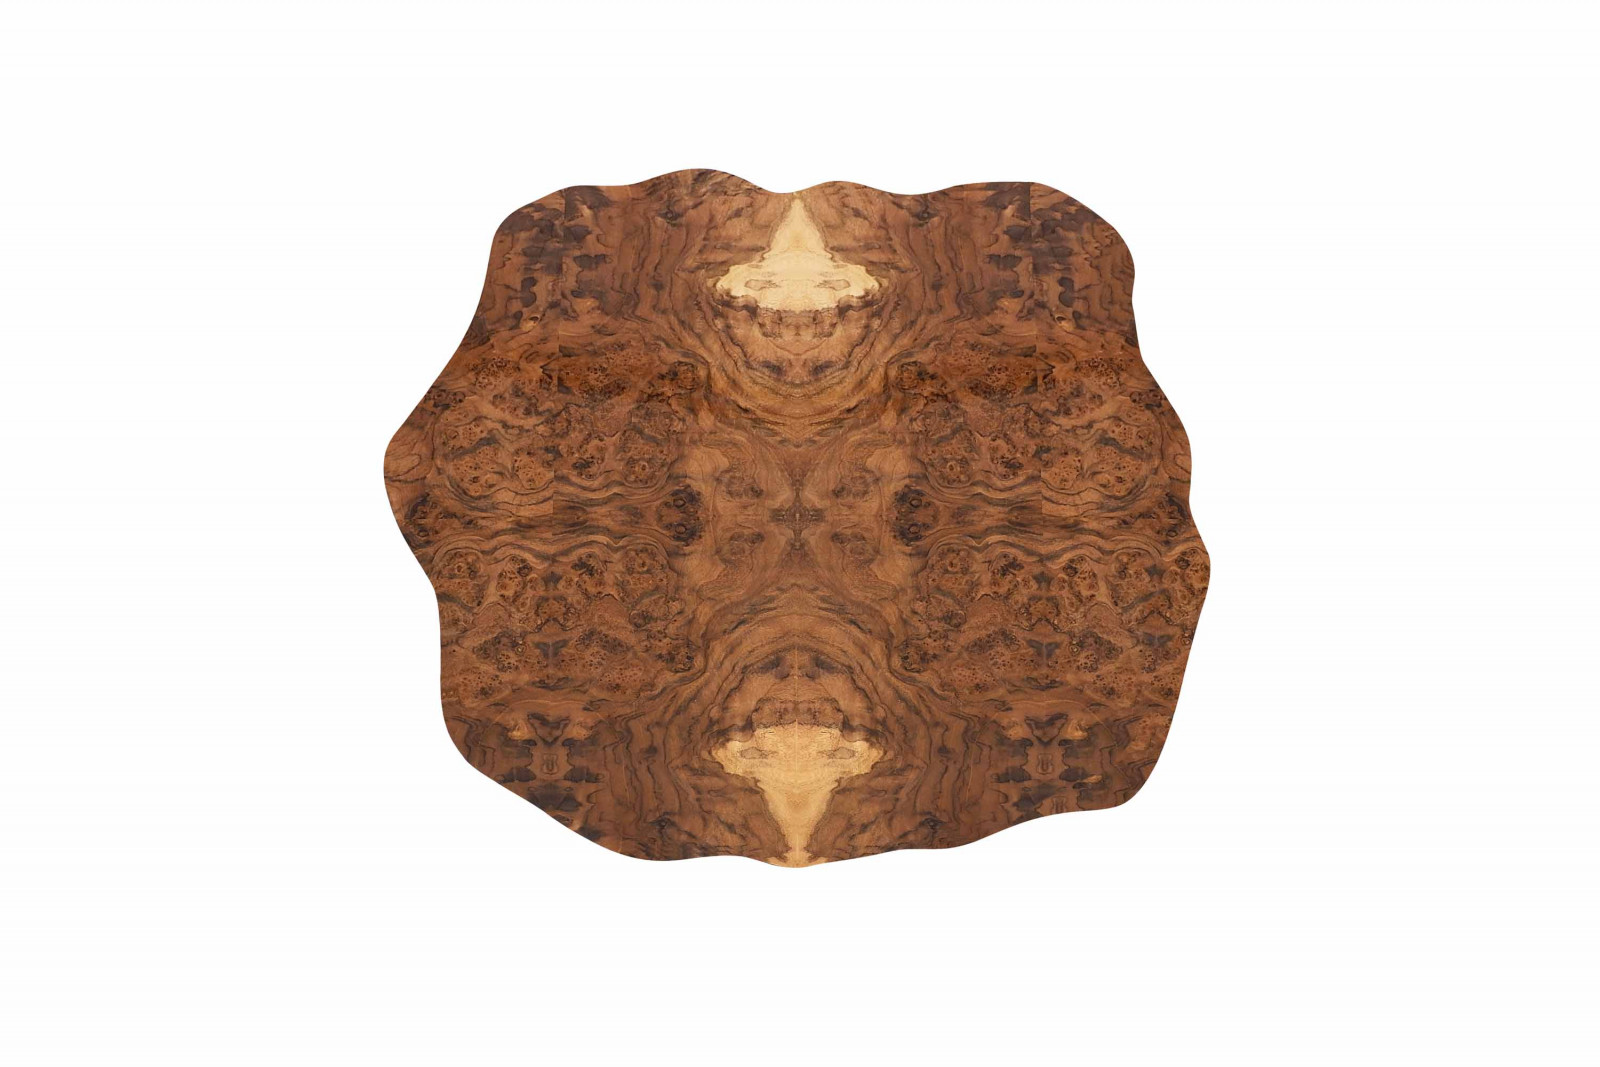 coffee_center_table_exclusive_luxurious_sculptural_trunk_brass_walnut_root_arbor_karpa_27-1397-1600-1400-100